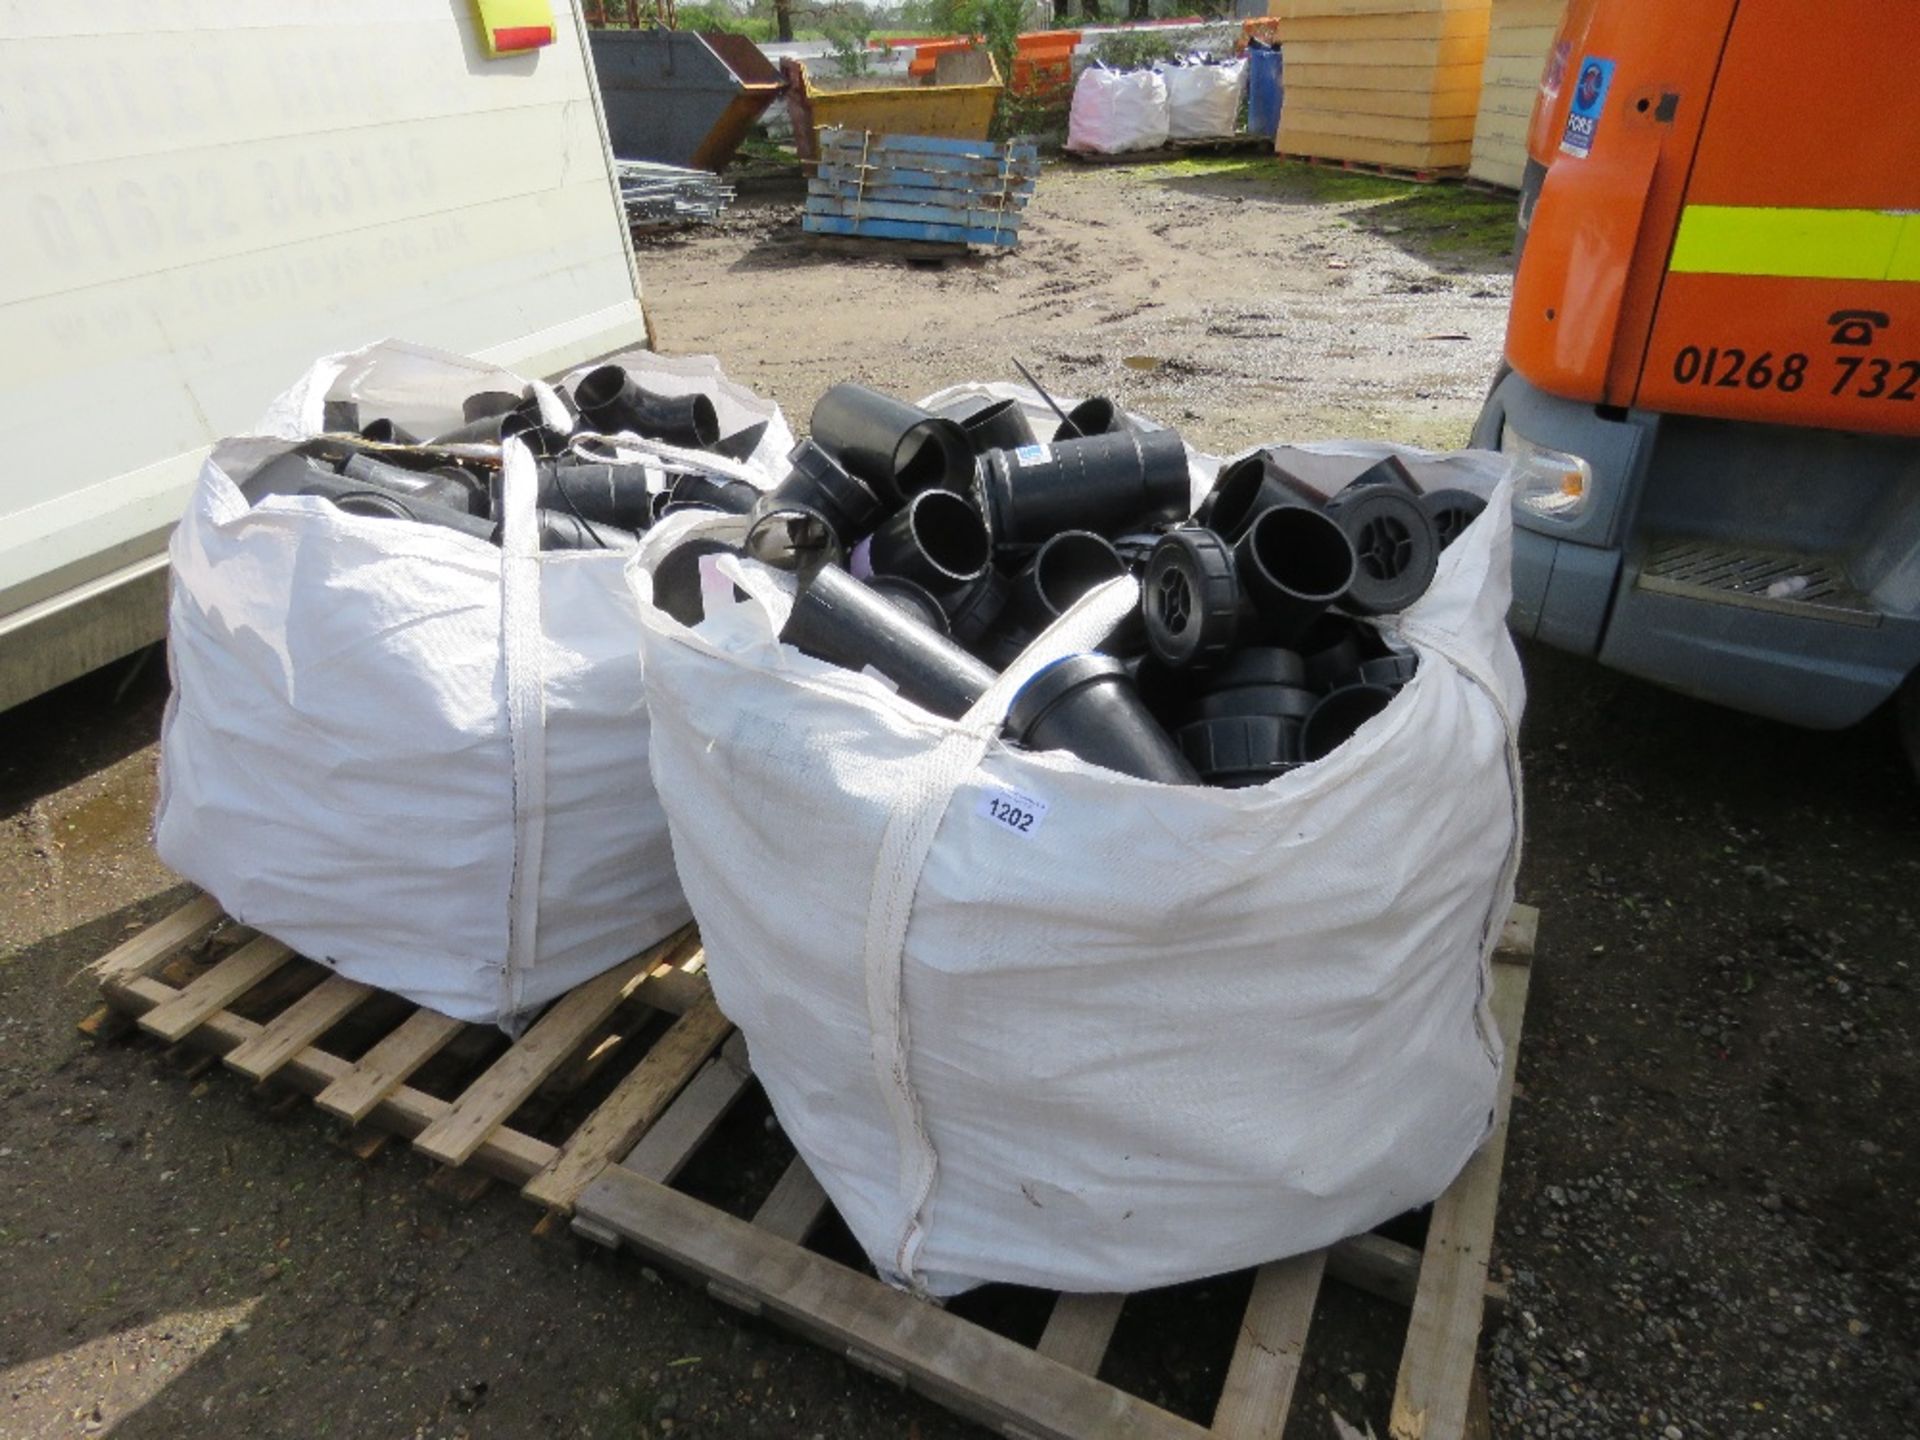 2 X BULK BAGS CONTAINING PLASTIC PIPE JOINTS AND FITTINGS.